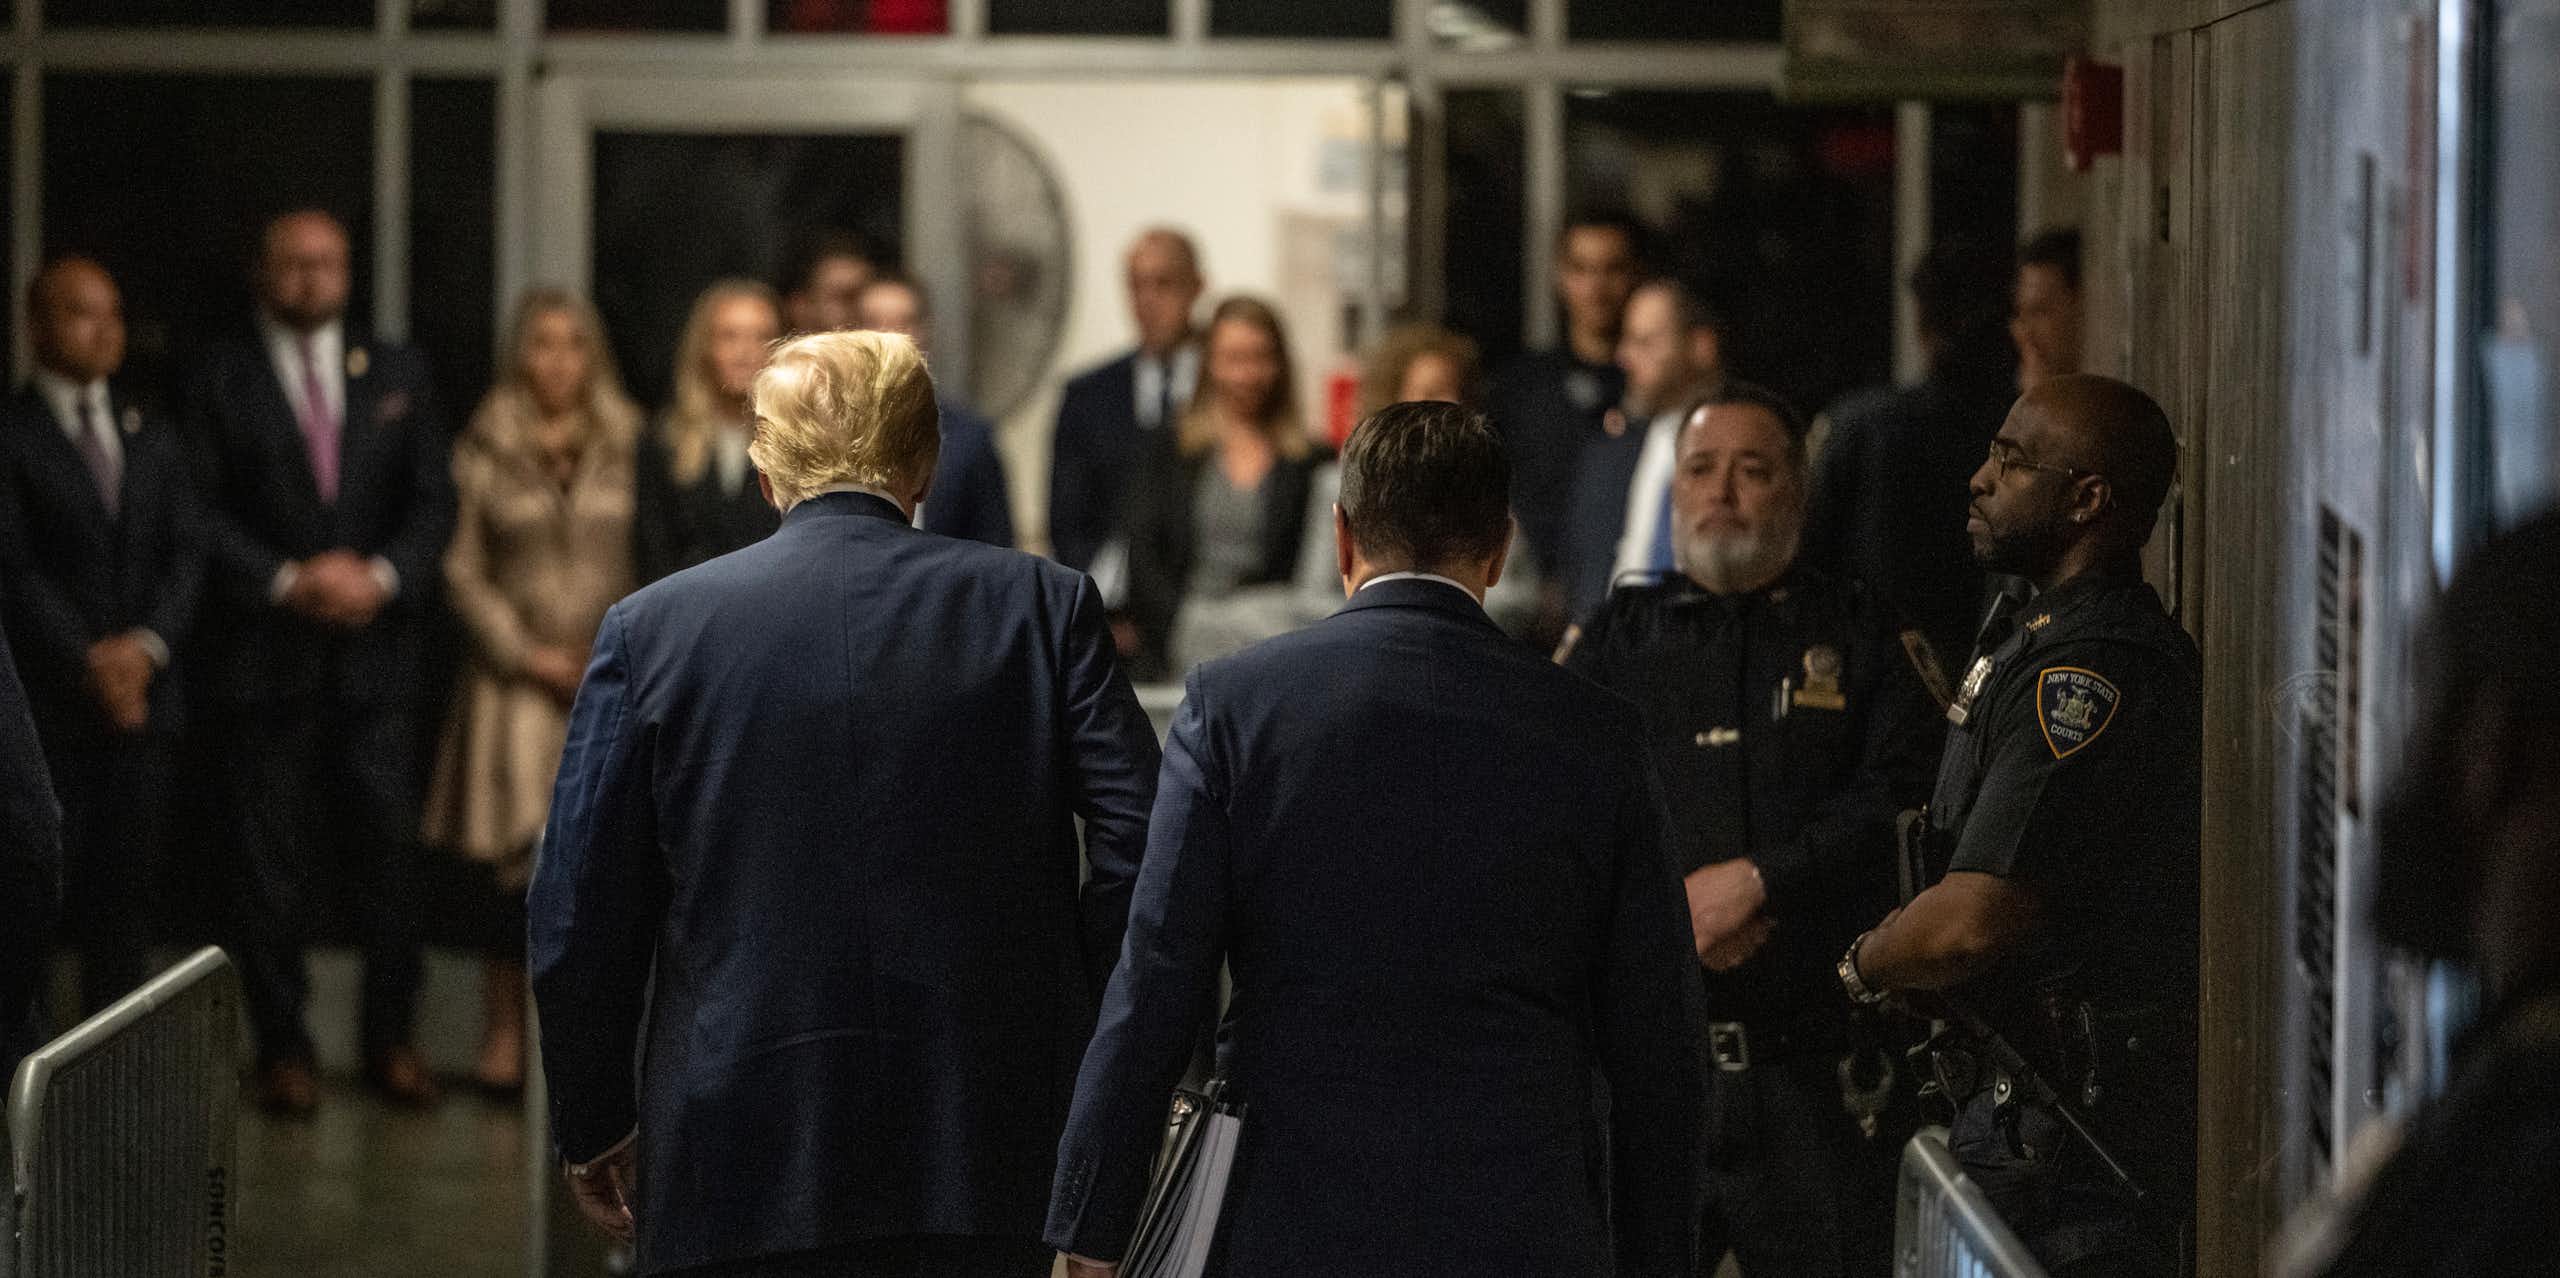 A man with golden hair is walking into a courtroom surrounded by police officers and men and women dressed in business attire. 